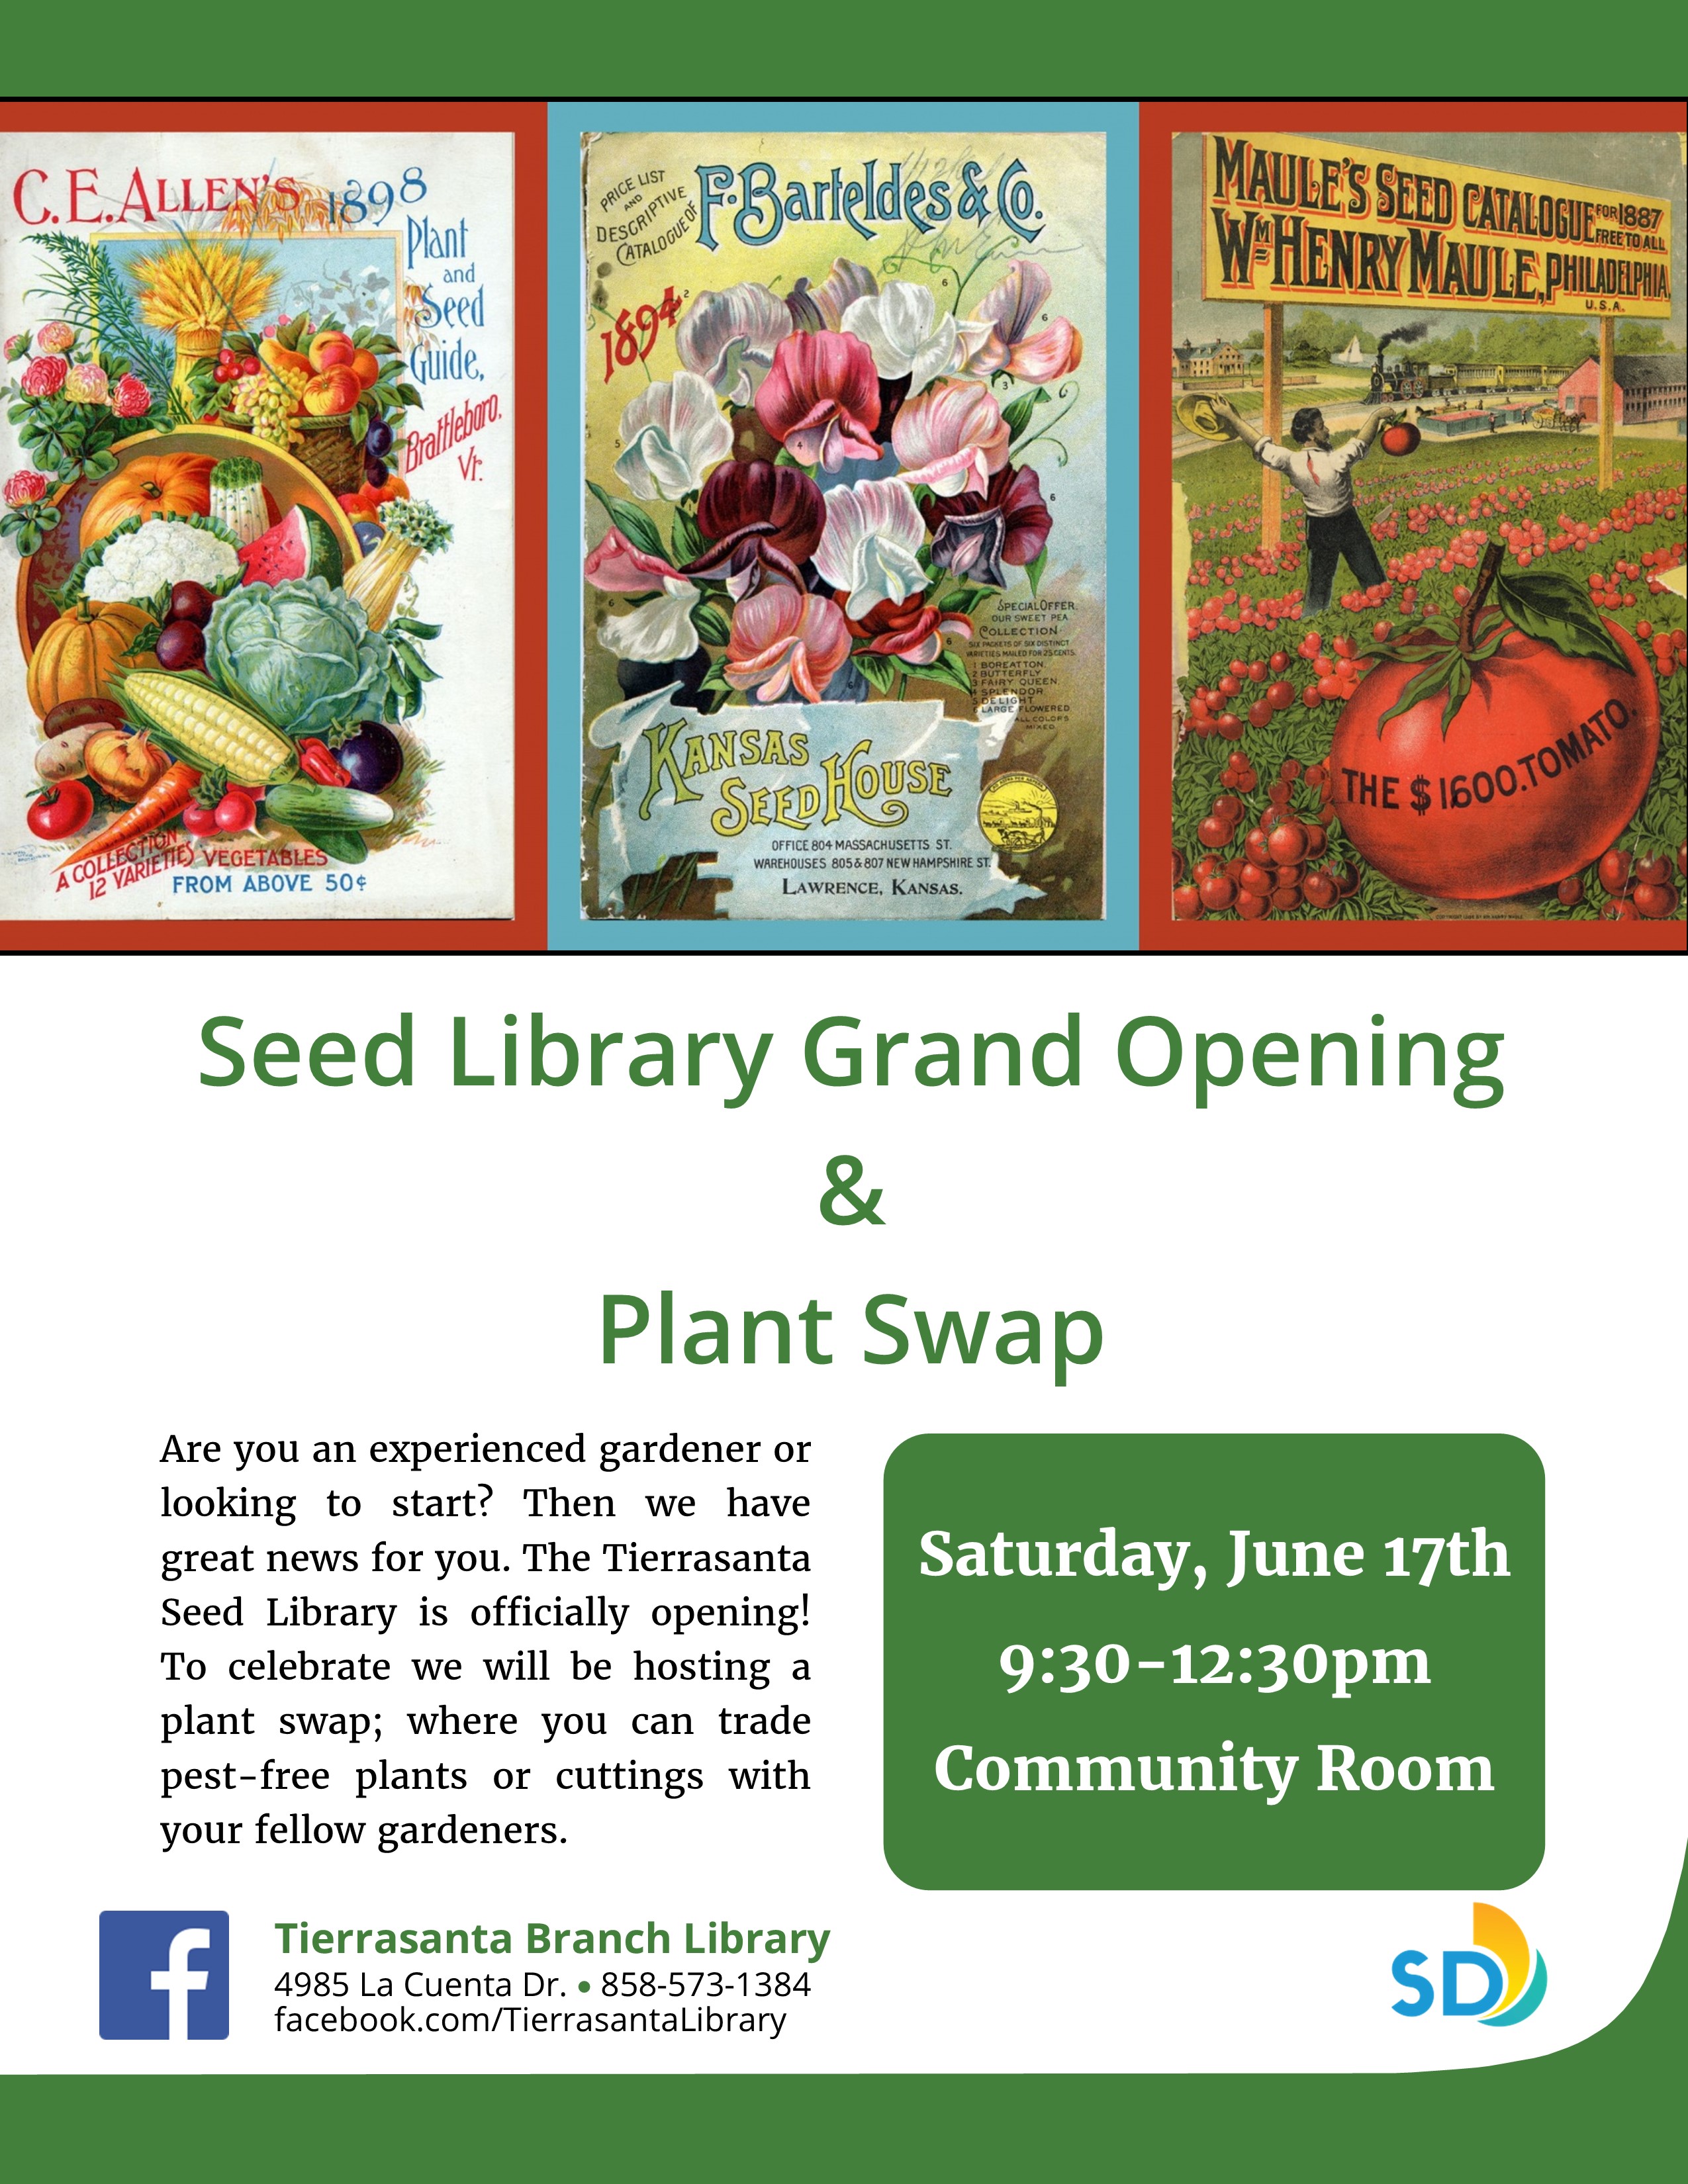 Flyer with images of colorfully illustrated seed packets